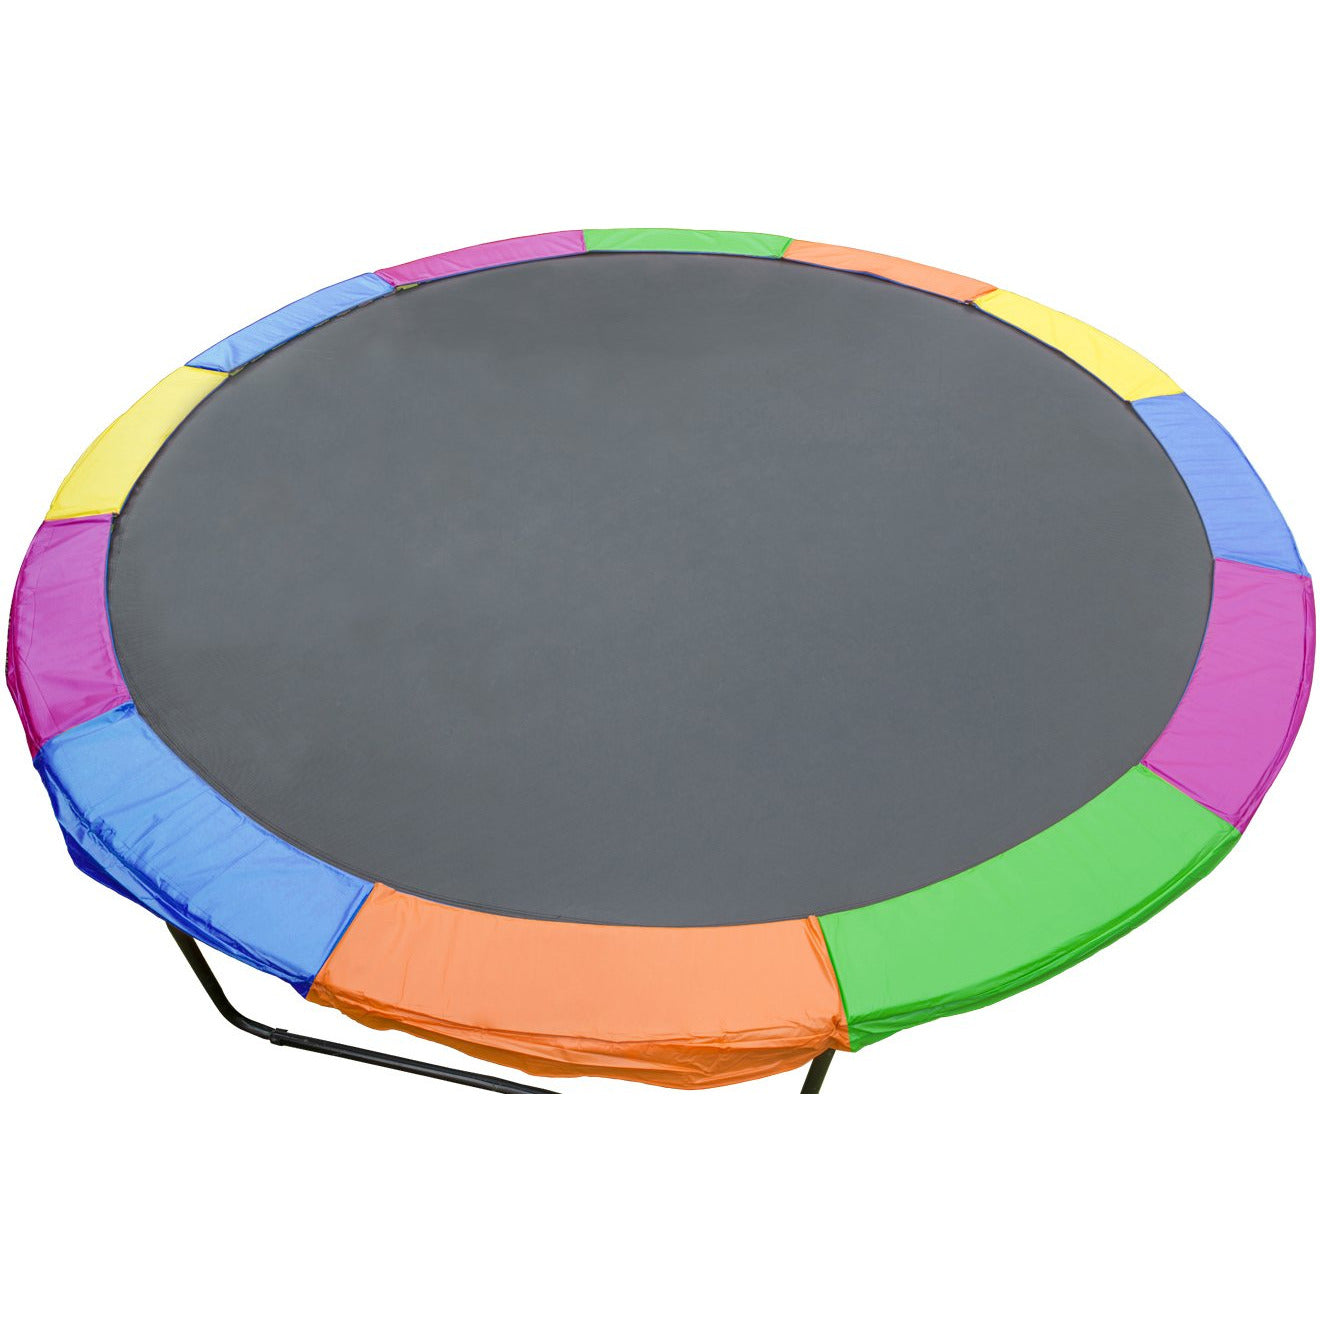 Trampoline 12ft Replacement Outdoor Round Spring Pad Cover - Rainbow